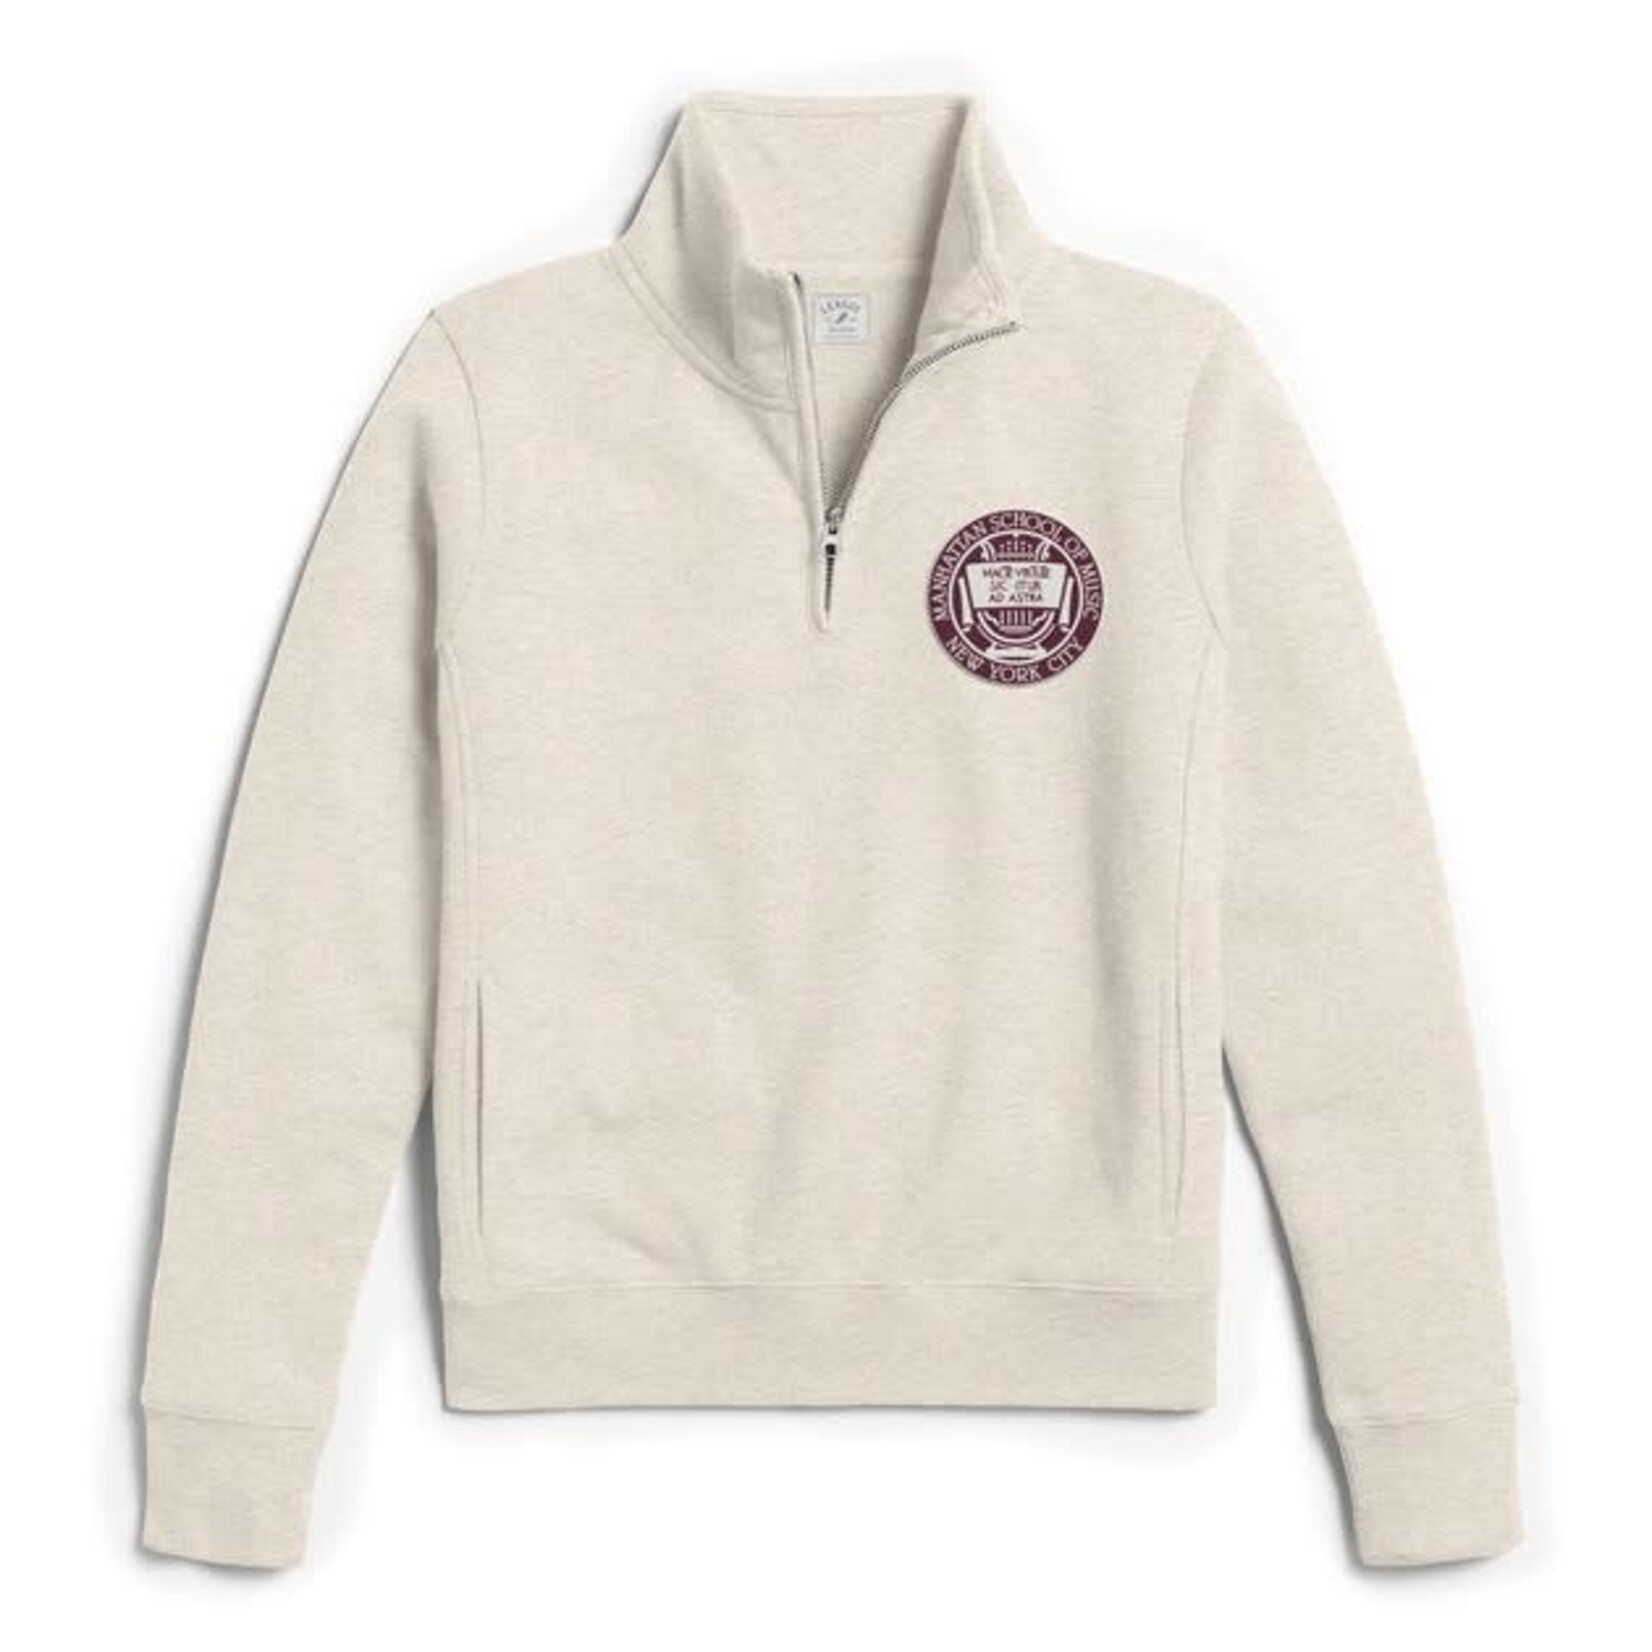 MSM Stadium 1/4 Zip with Embroidered Seal